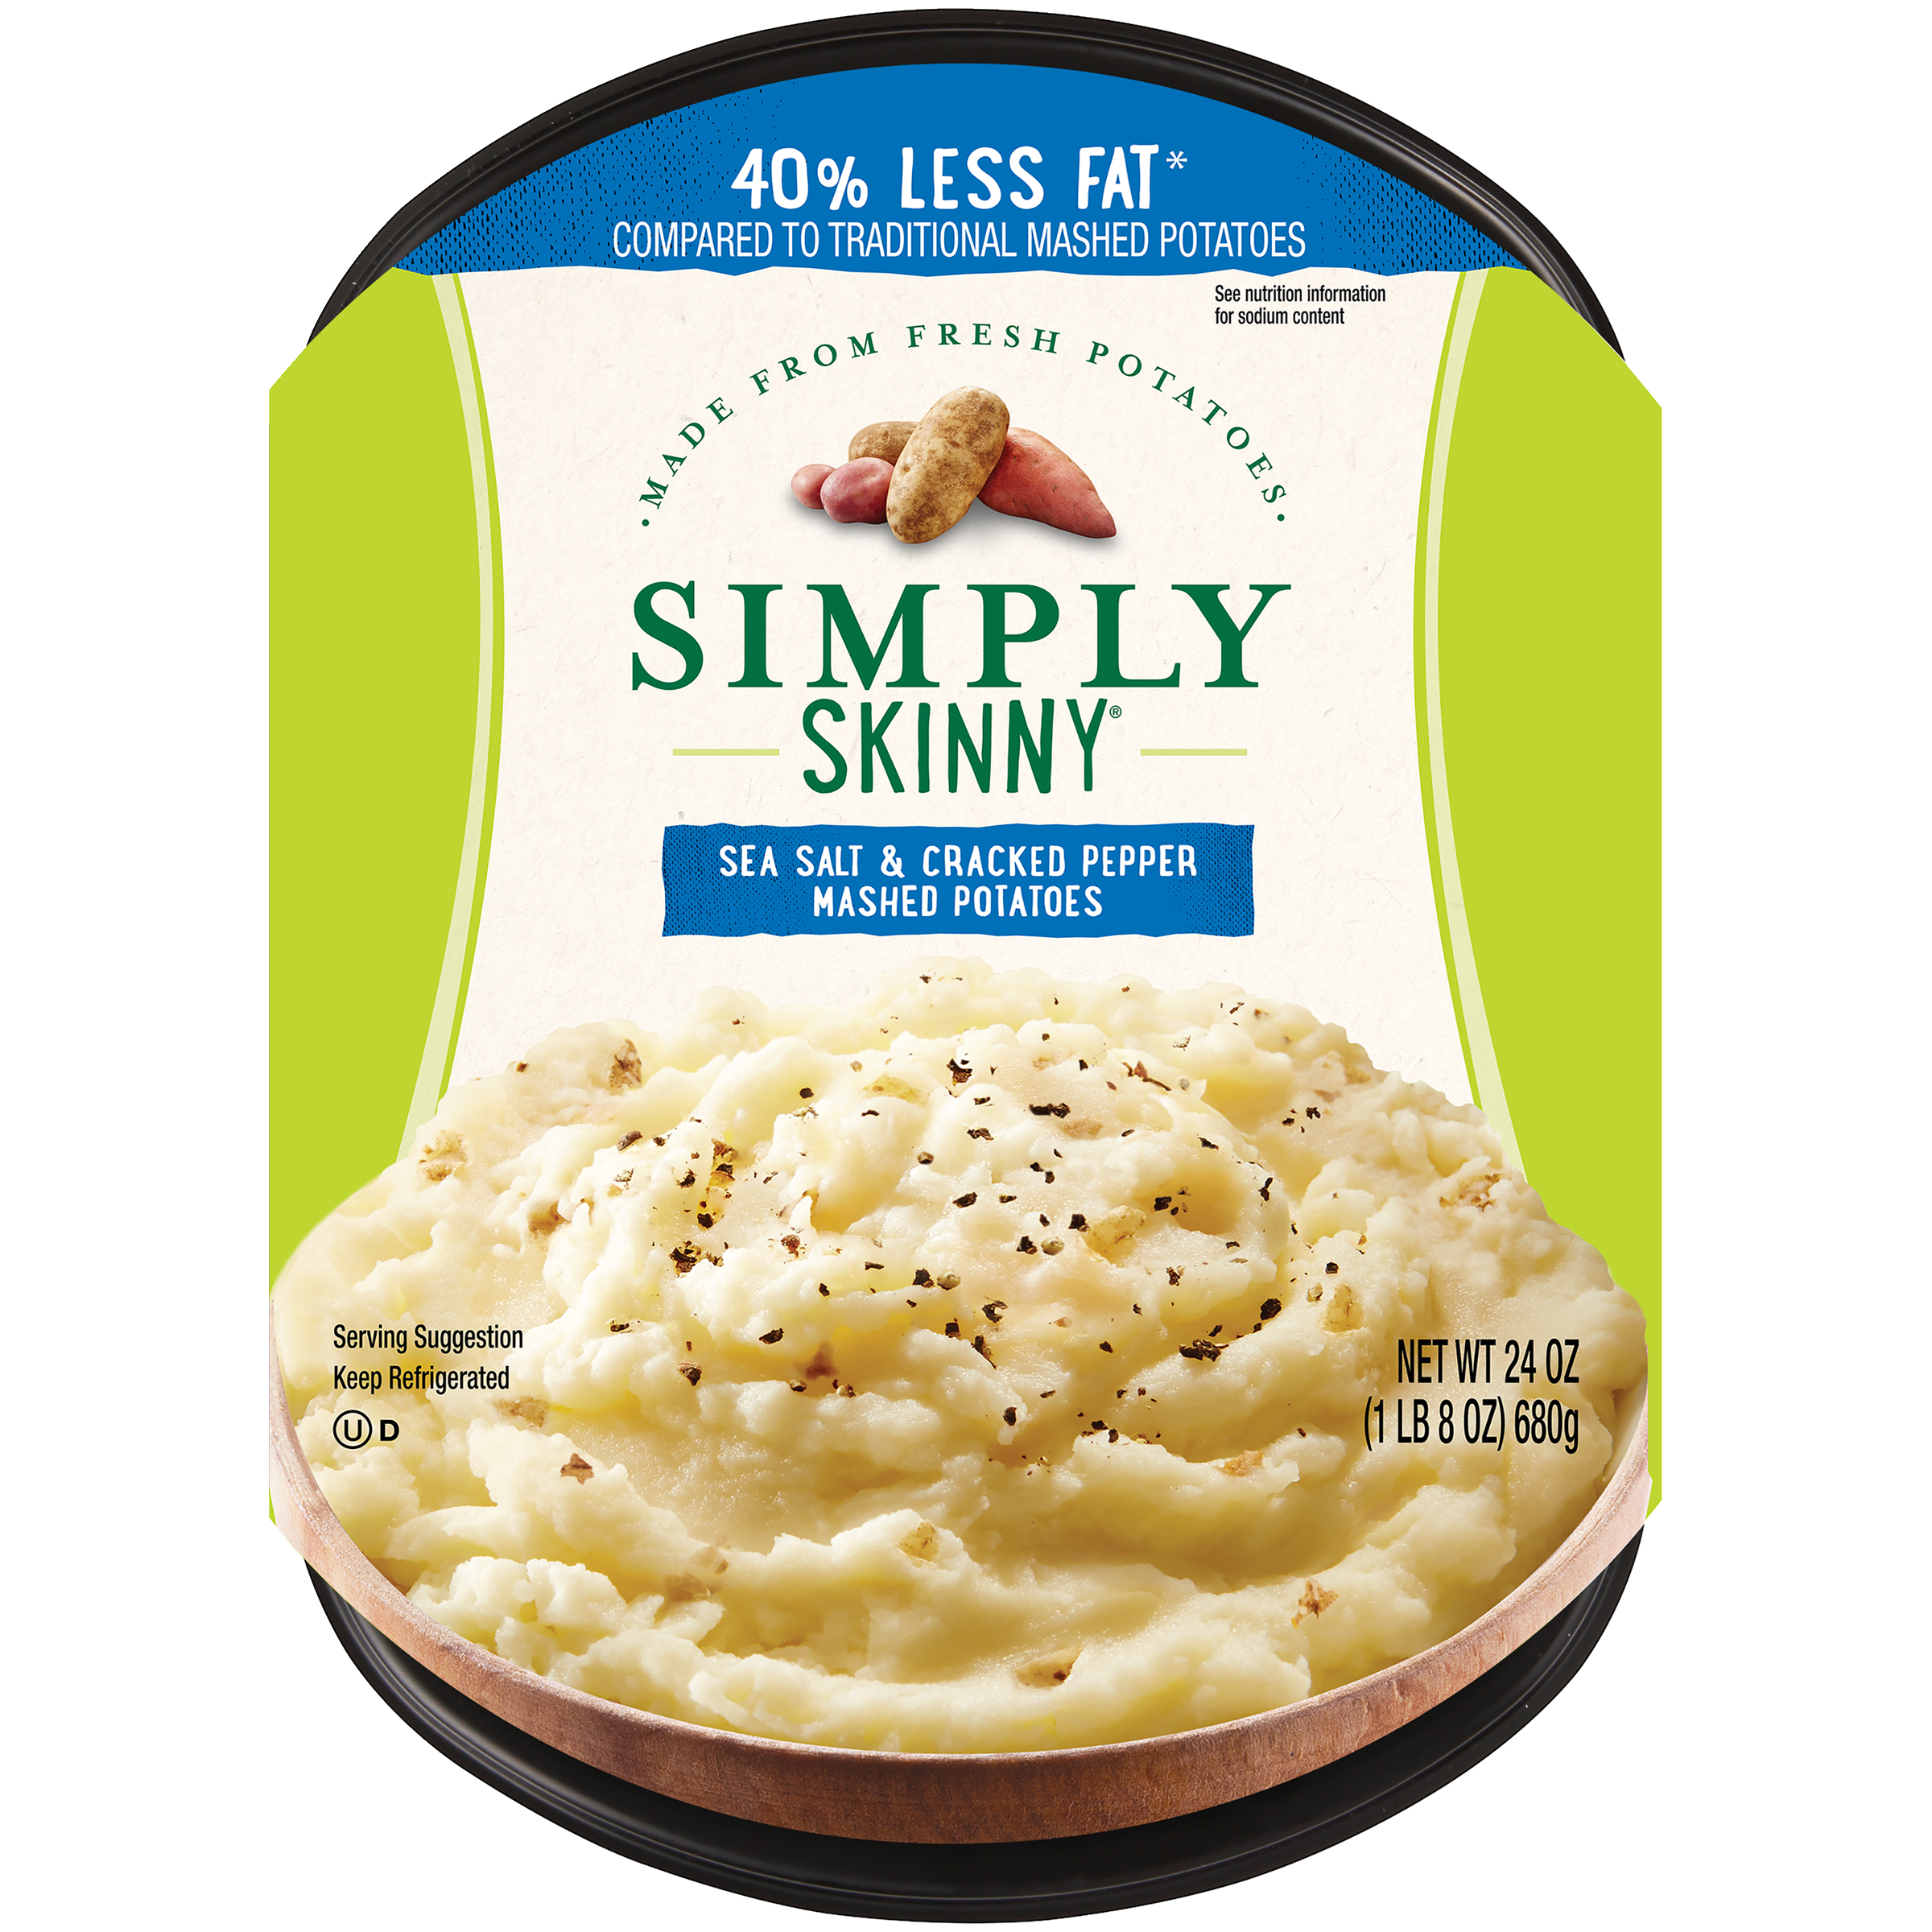 Simply Skinny Sea Salt & Cracked Pepper Mashed Potatoes product image